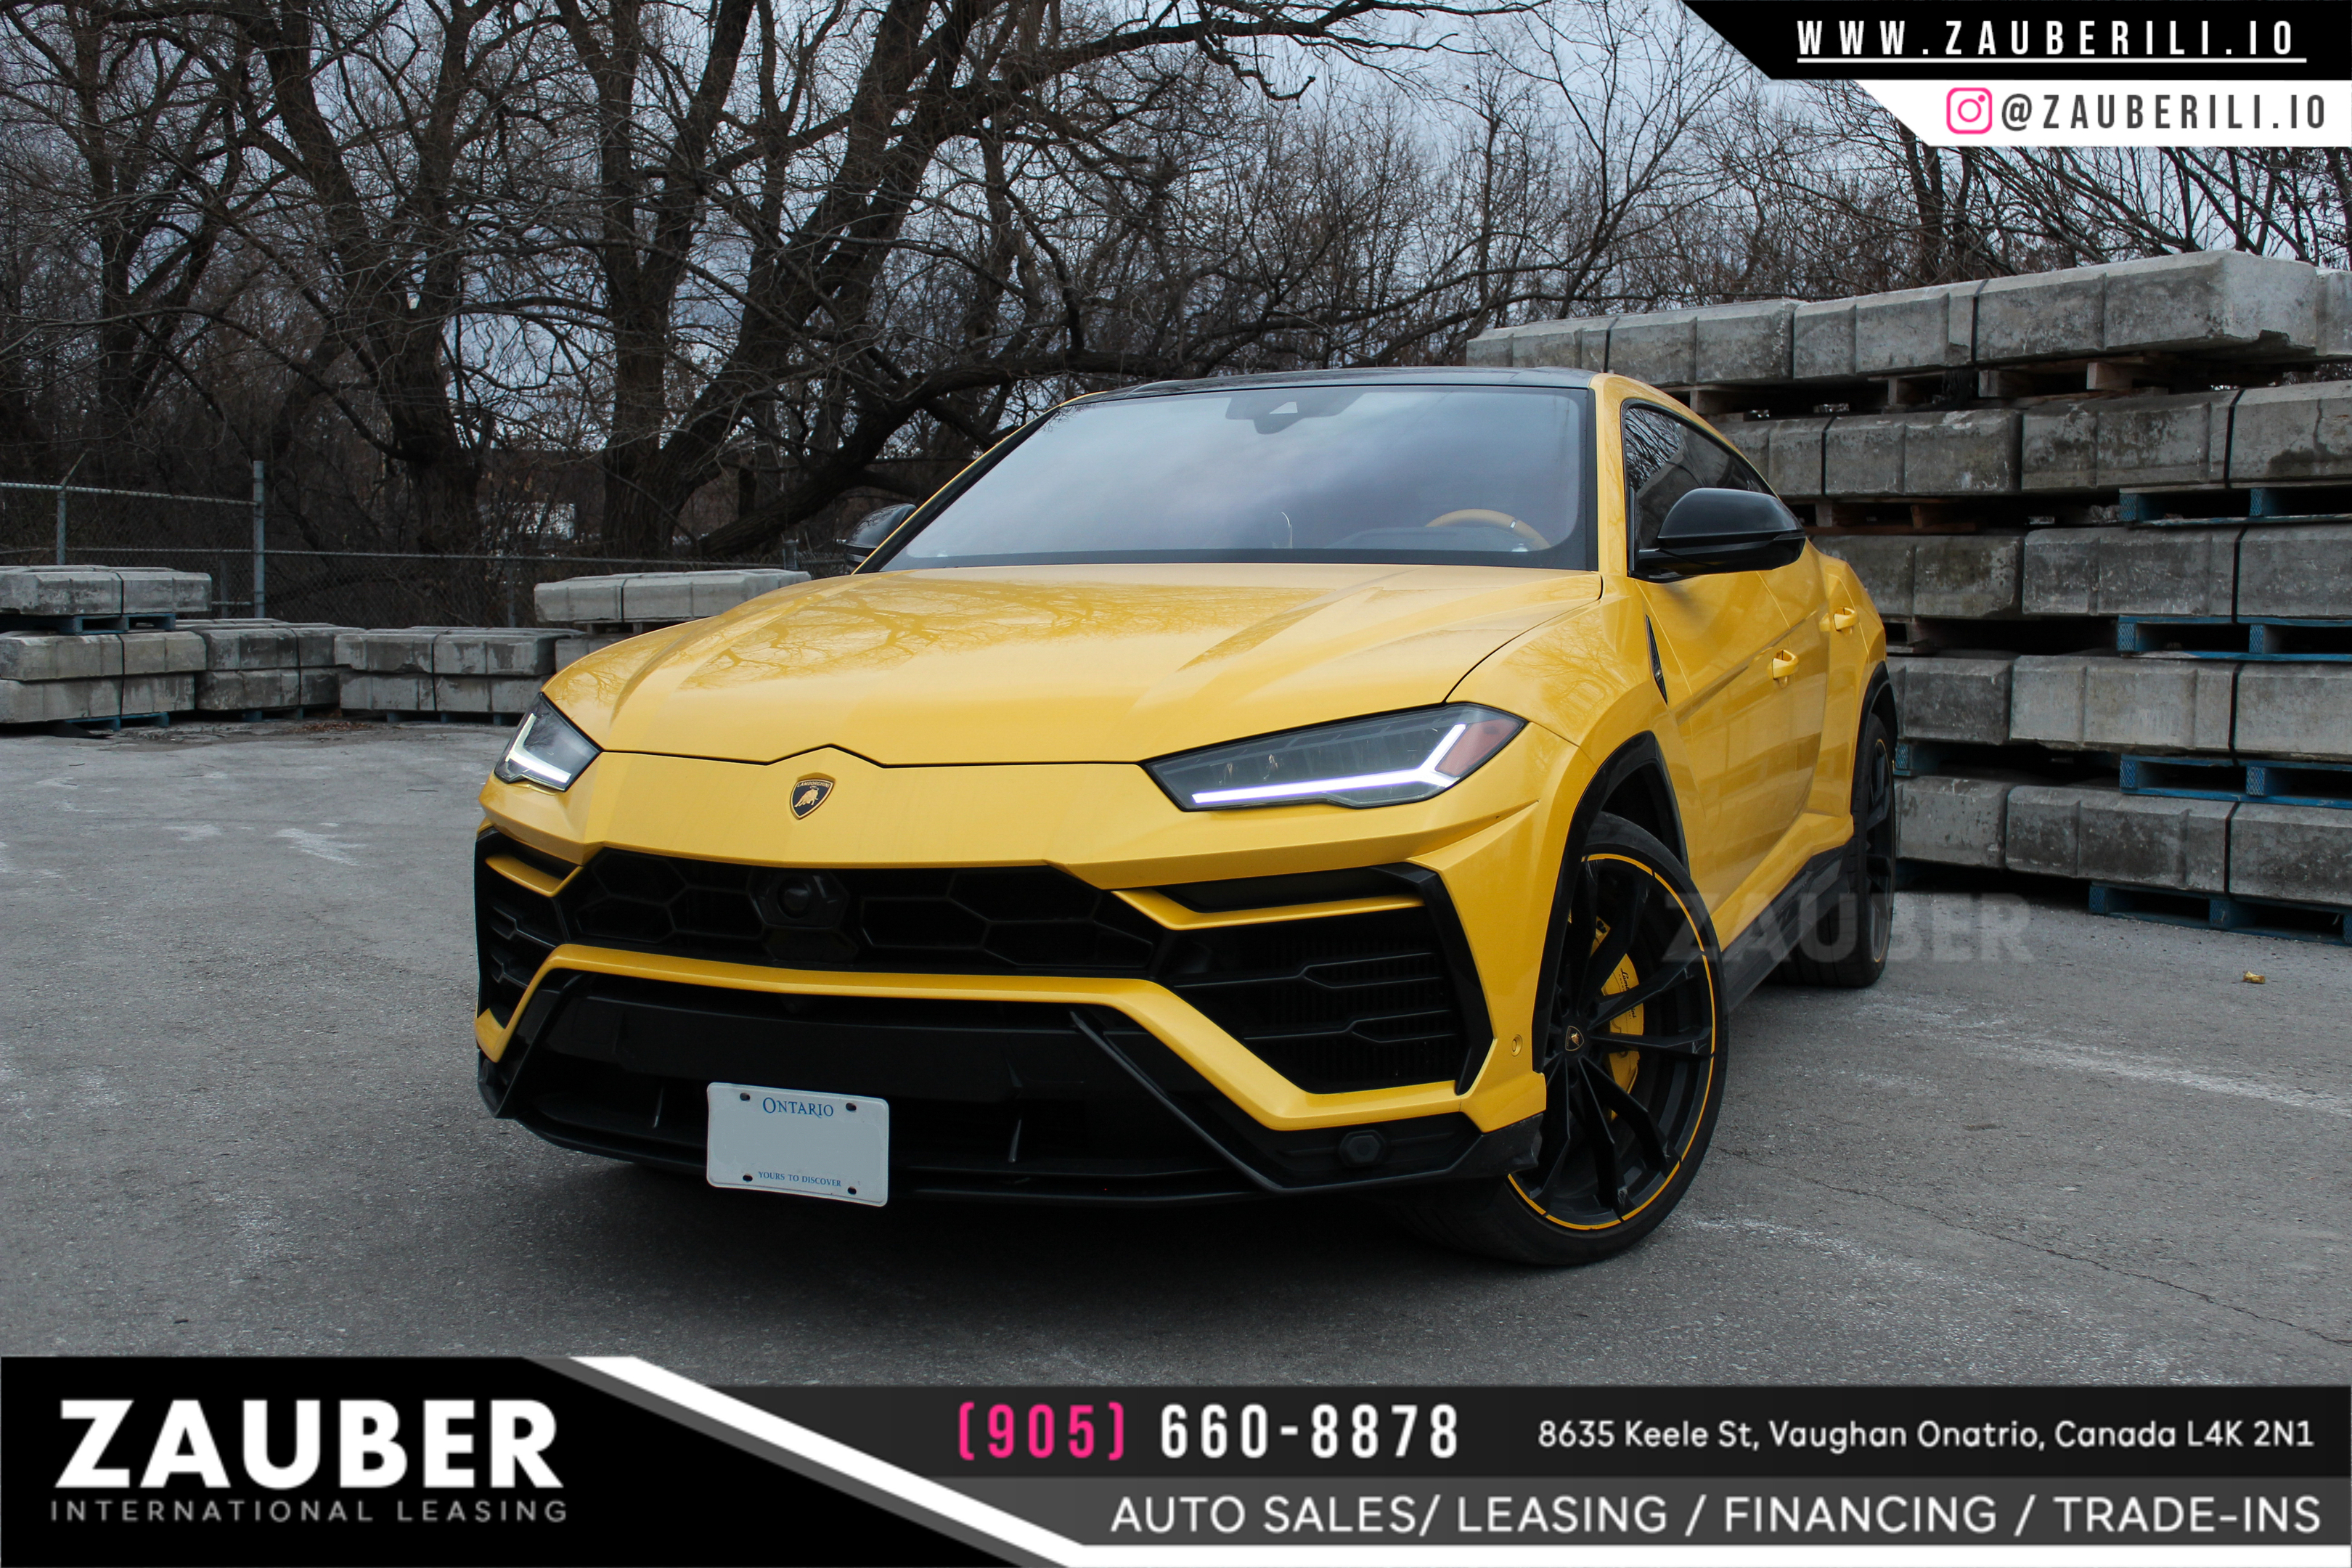 2021 Lamborghini Urus *VIEWINGS BY APPOINTMENT ONLY*